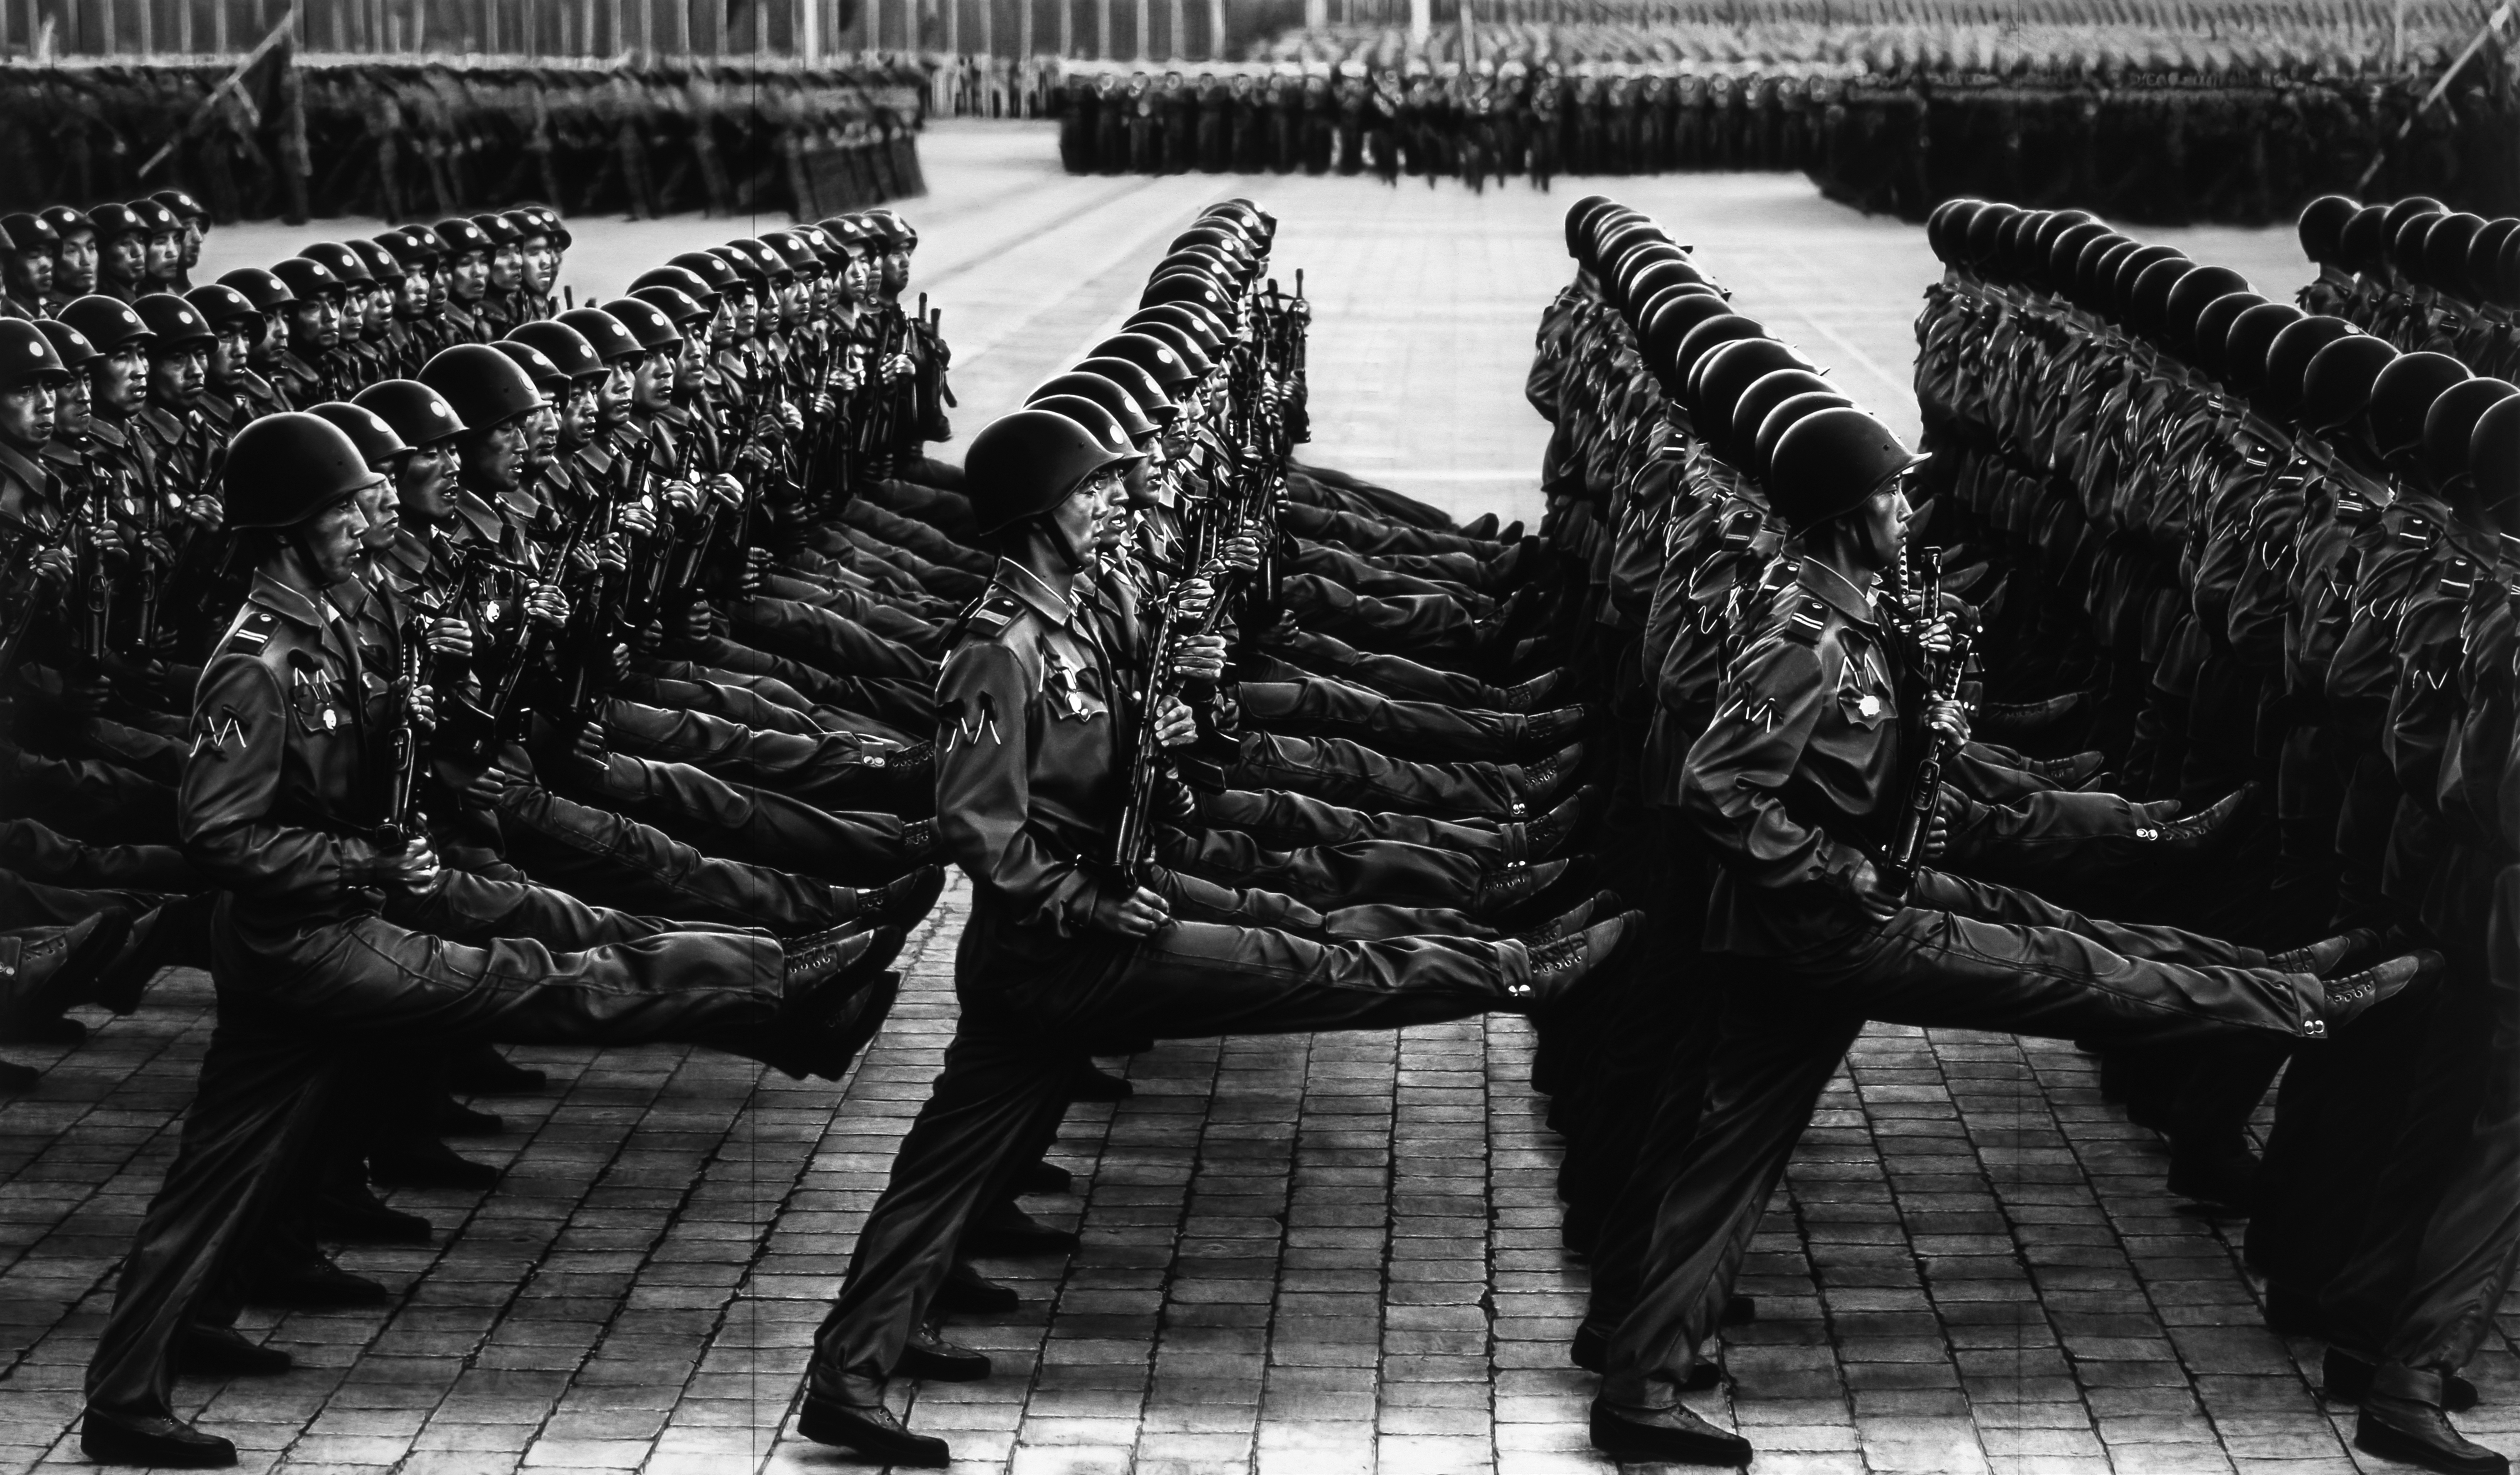 Robert Longo - Untitled (Marching Soldiers; (Party Foundation Day) Pyongyang, North Korea; October 10, 2015), 2019, charcoal on mounted paper